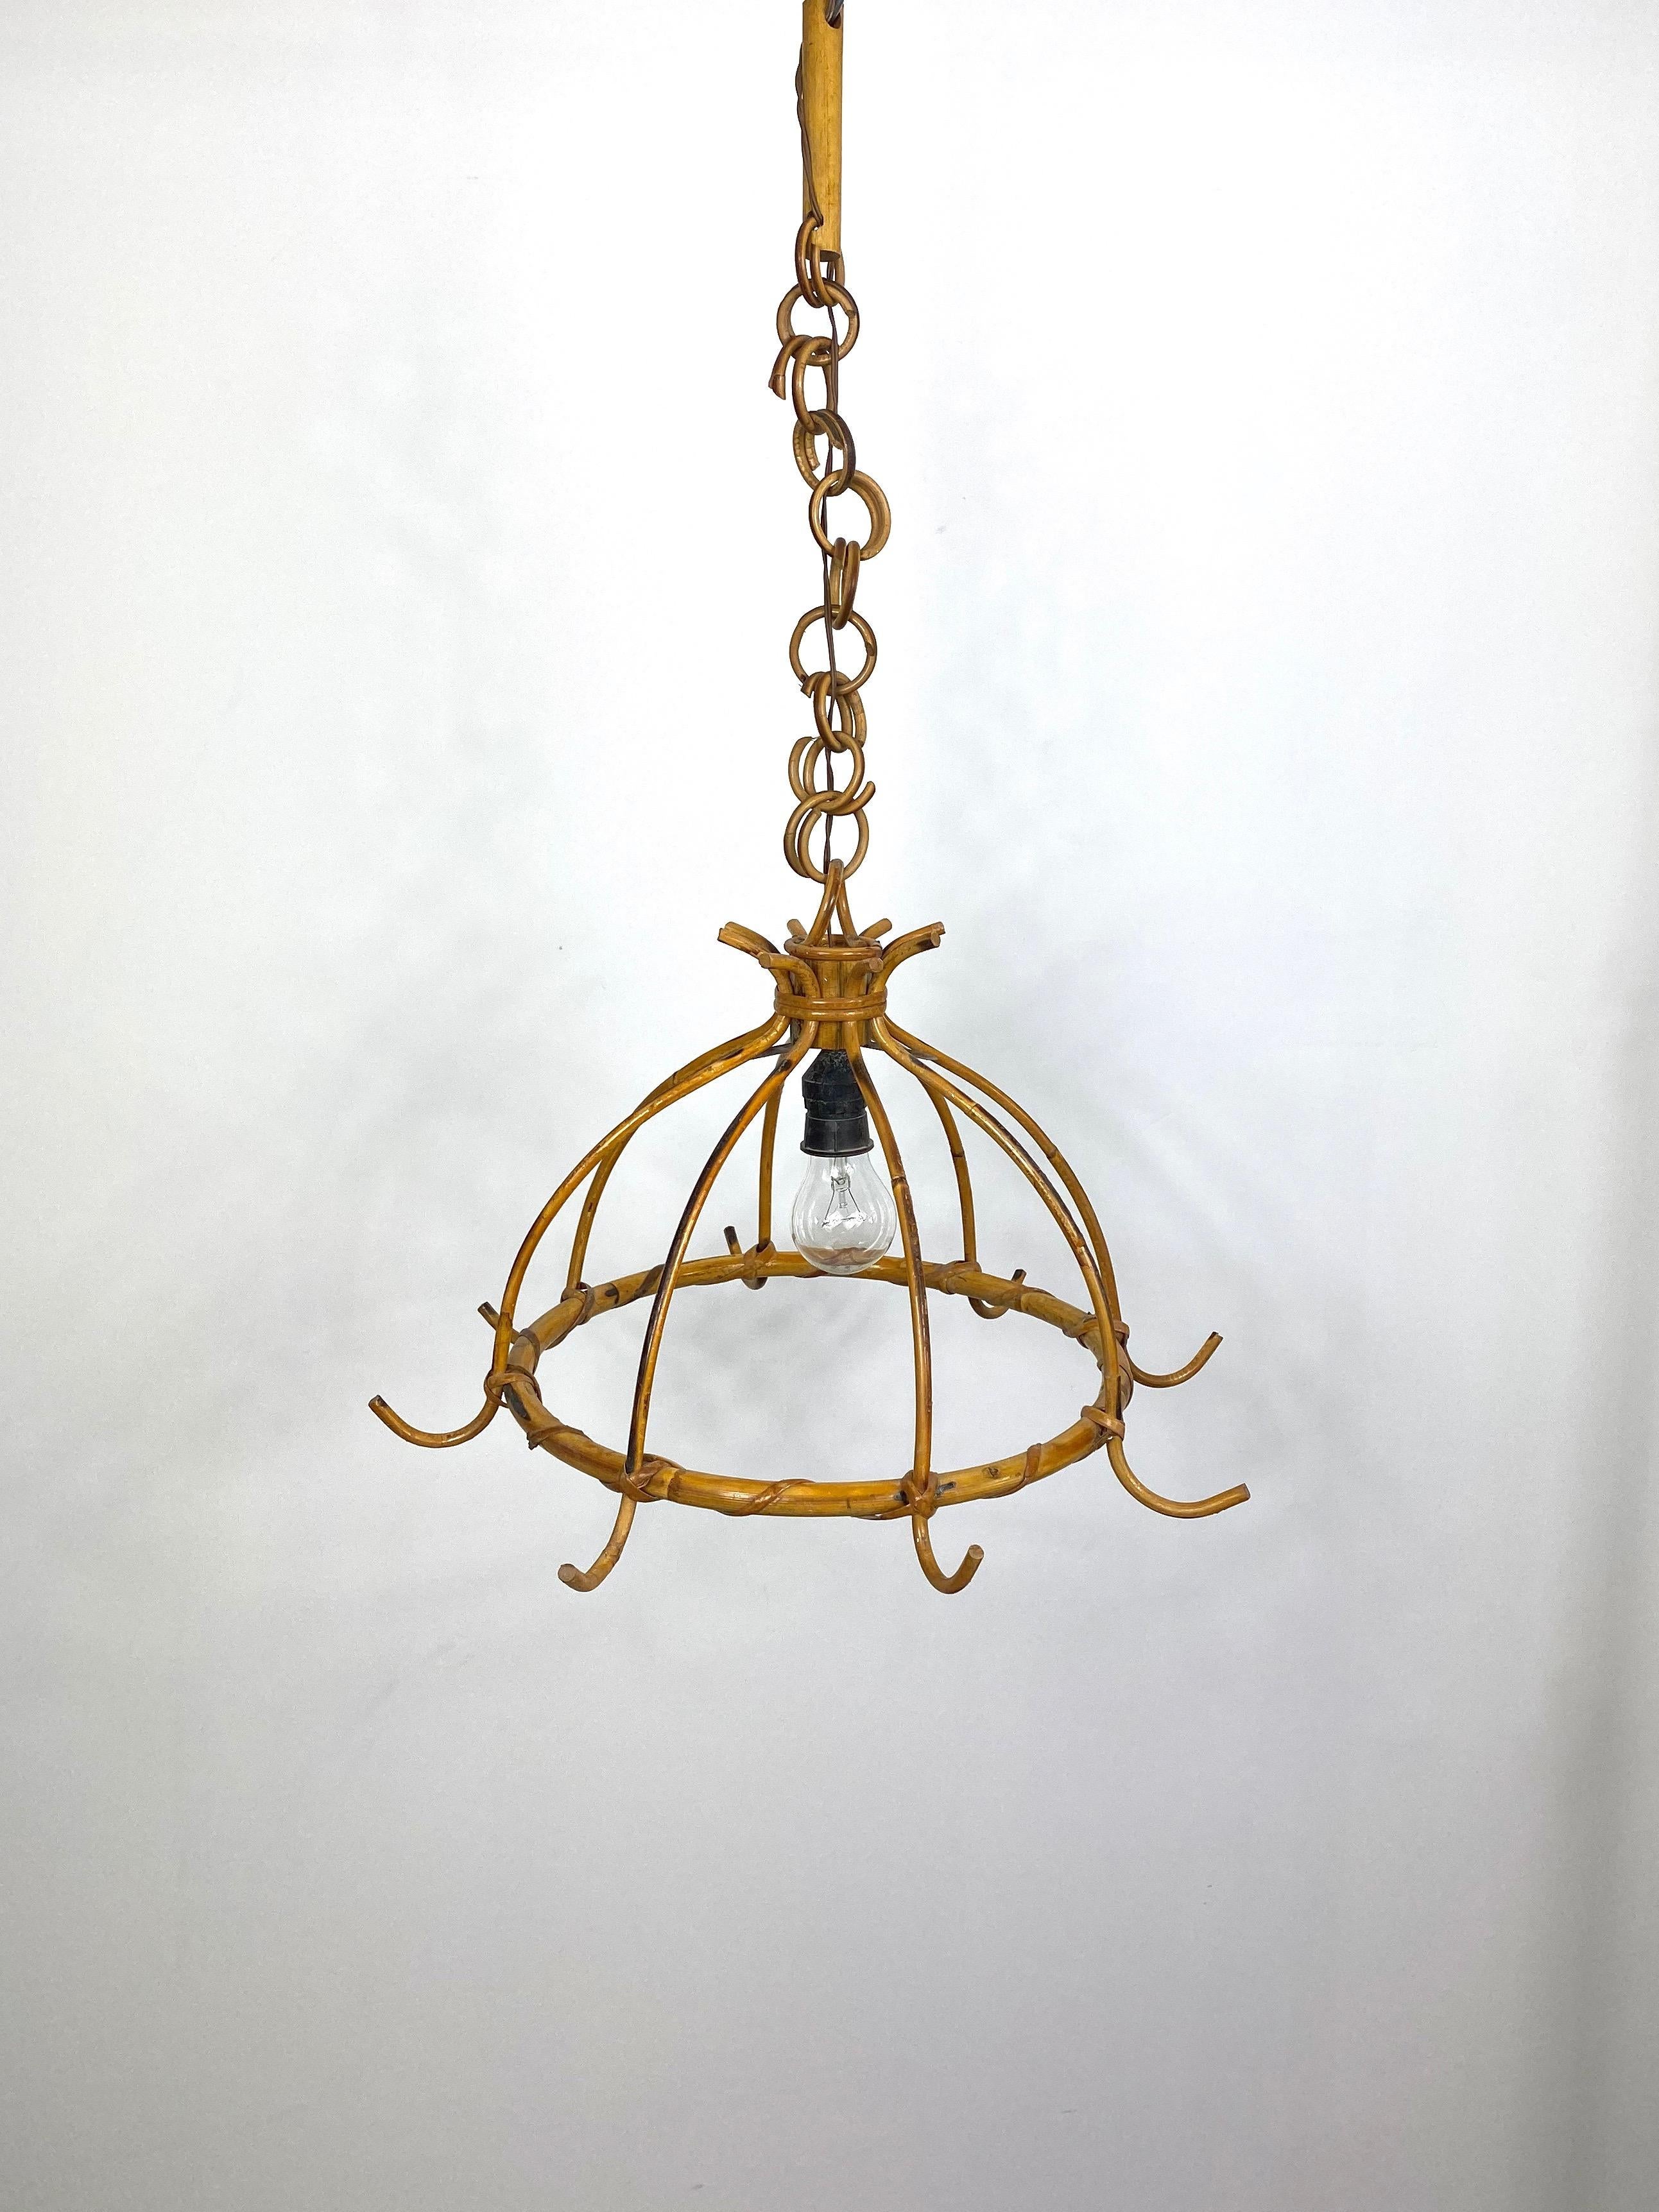 Chandelier Pendant, Bamboo Rattan and Rope, Italy, 1960s For Sale 1